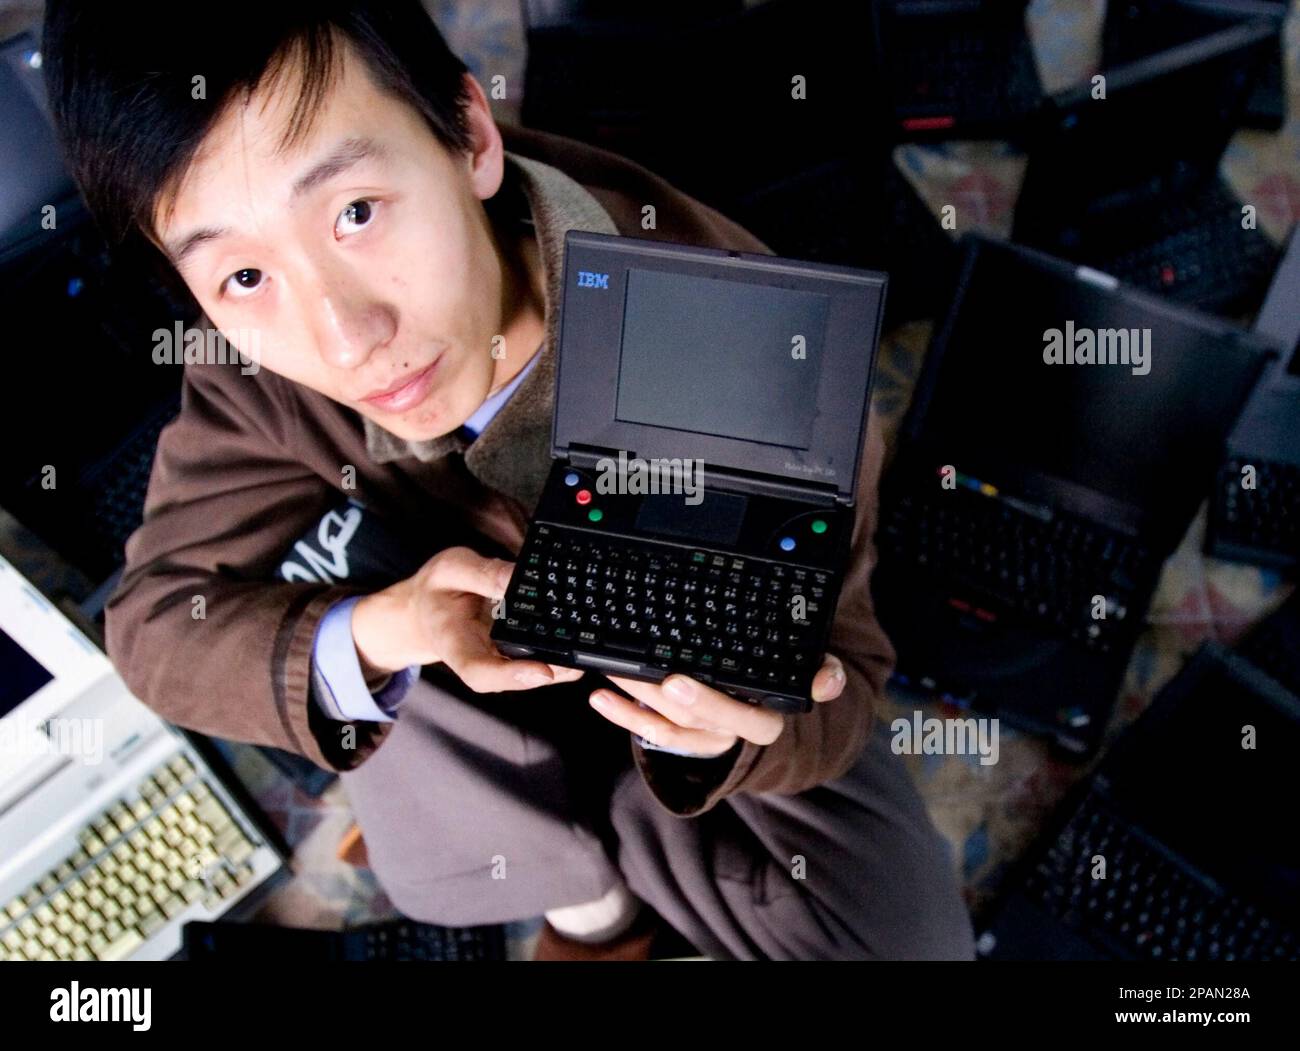 Hundimiento Nube Claire Guo Yue shows his first collection of IBM laptop computer PC110 model,  which was made only for Japanese market, while being surrounded by his  collection of other IBM laptops model at his